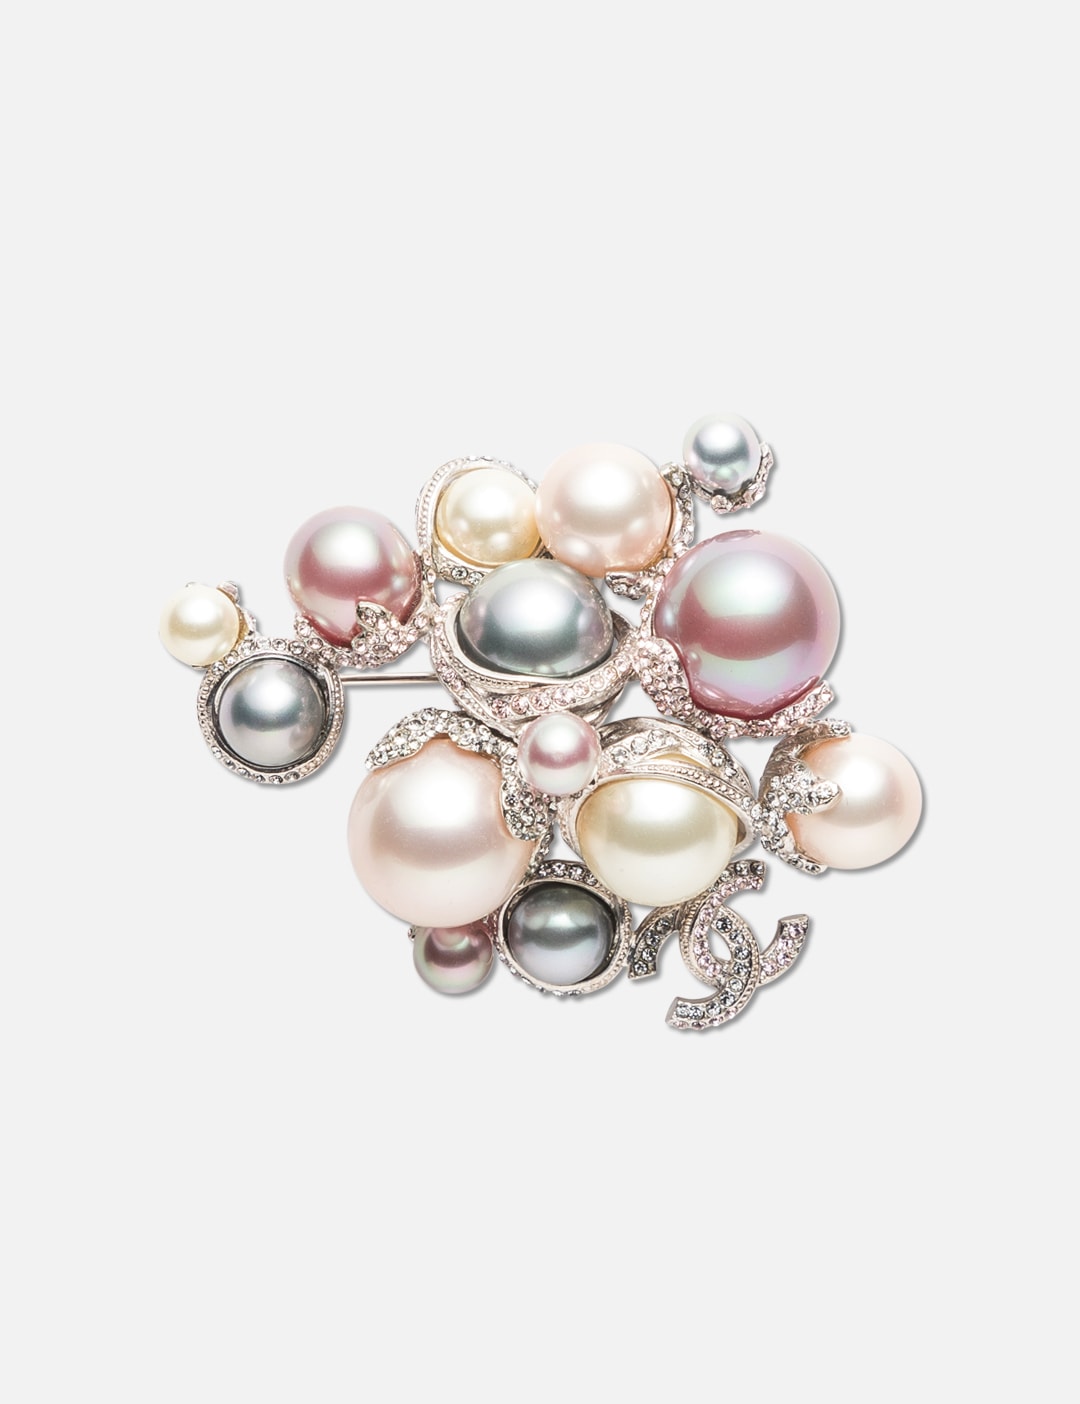 Chanel camellia brooch pin pearl rhinestone jewelry accessory with box  authentic